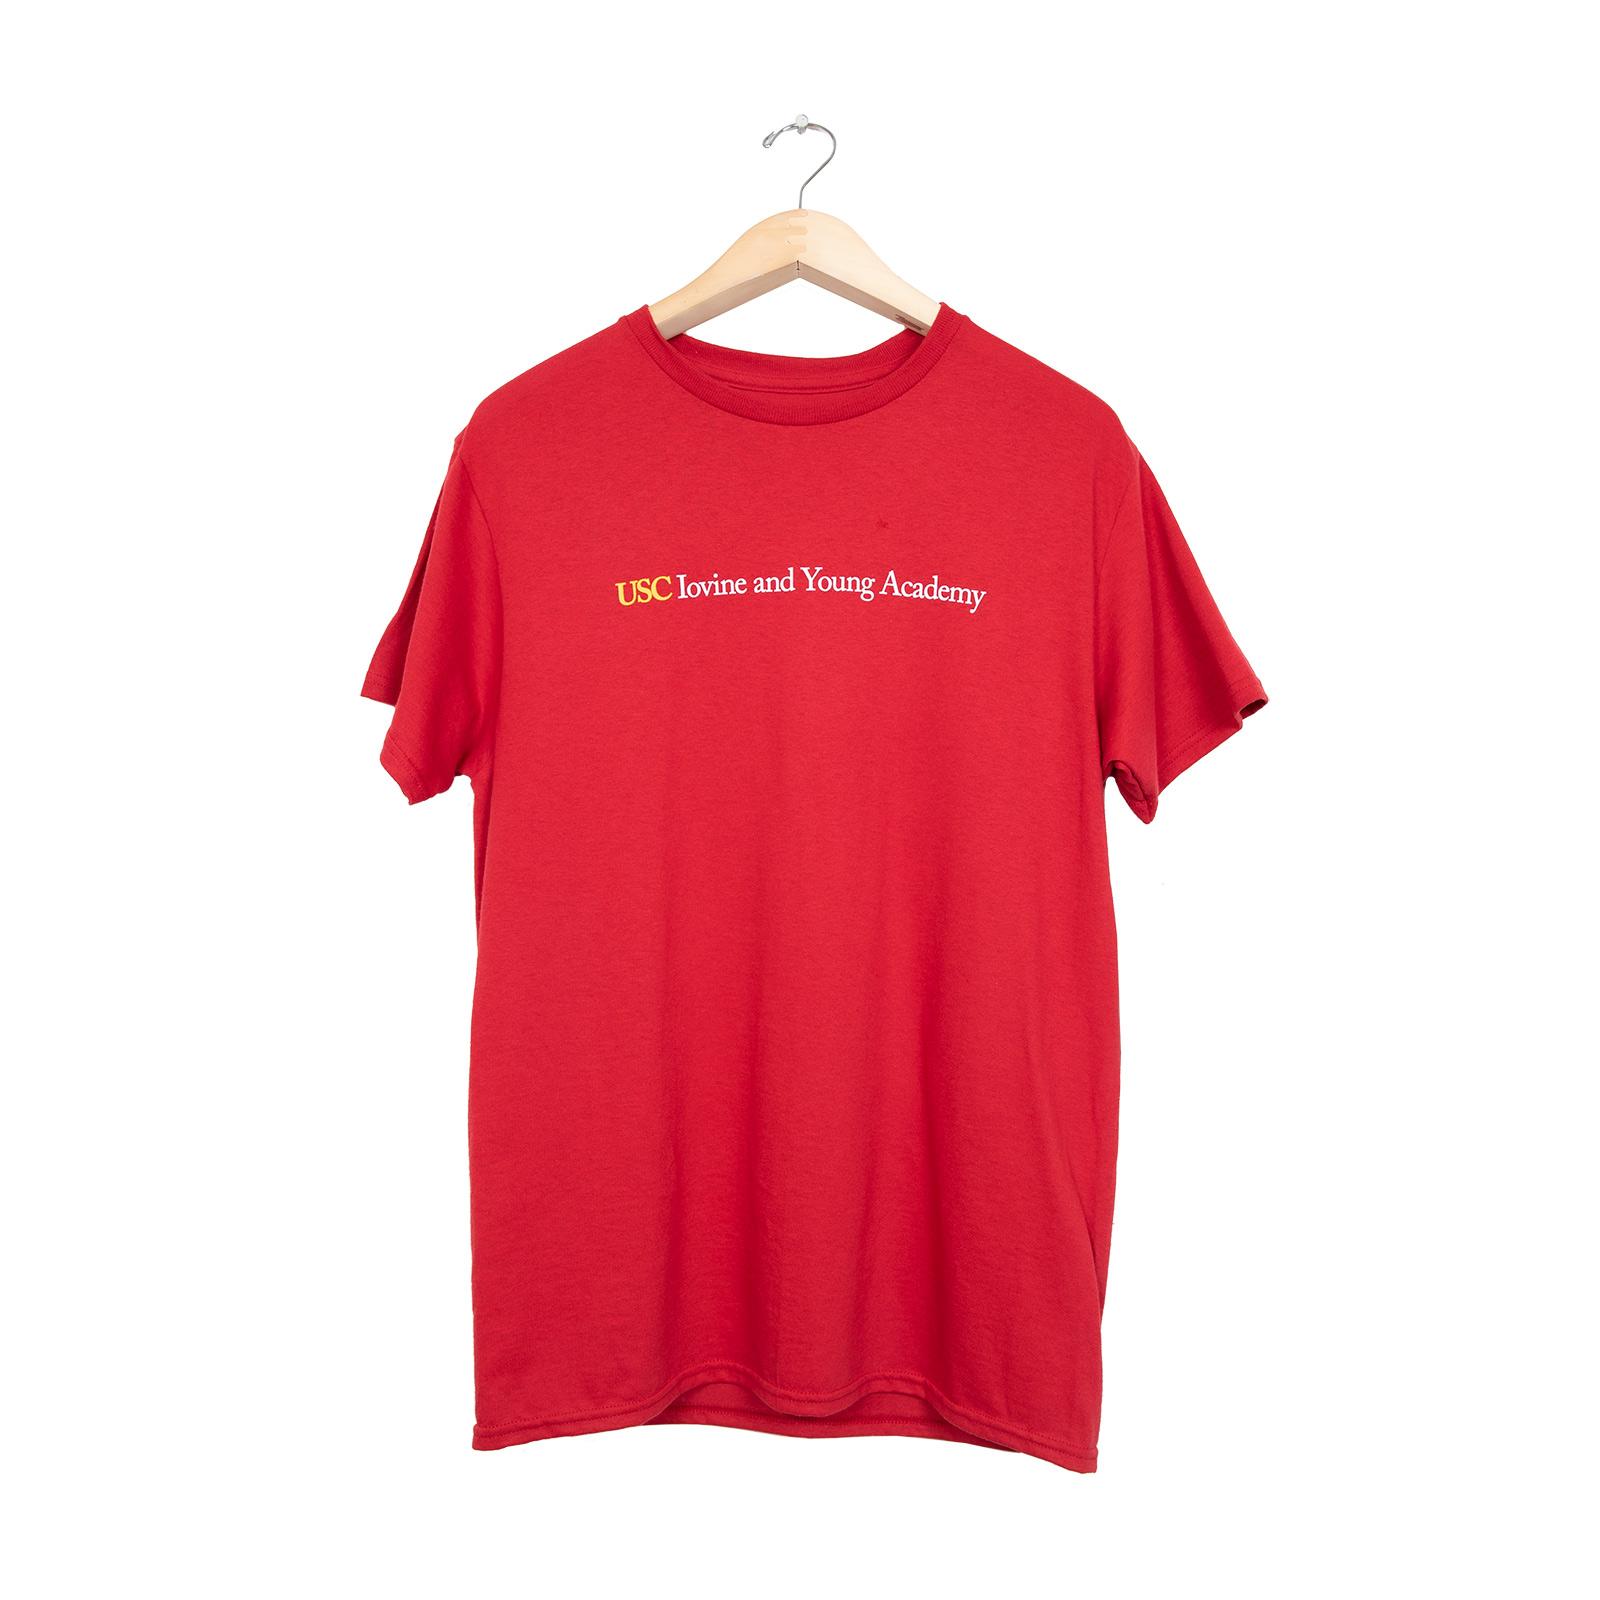 USC Iovine and Young Academy SS Tee image01